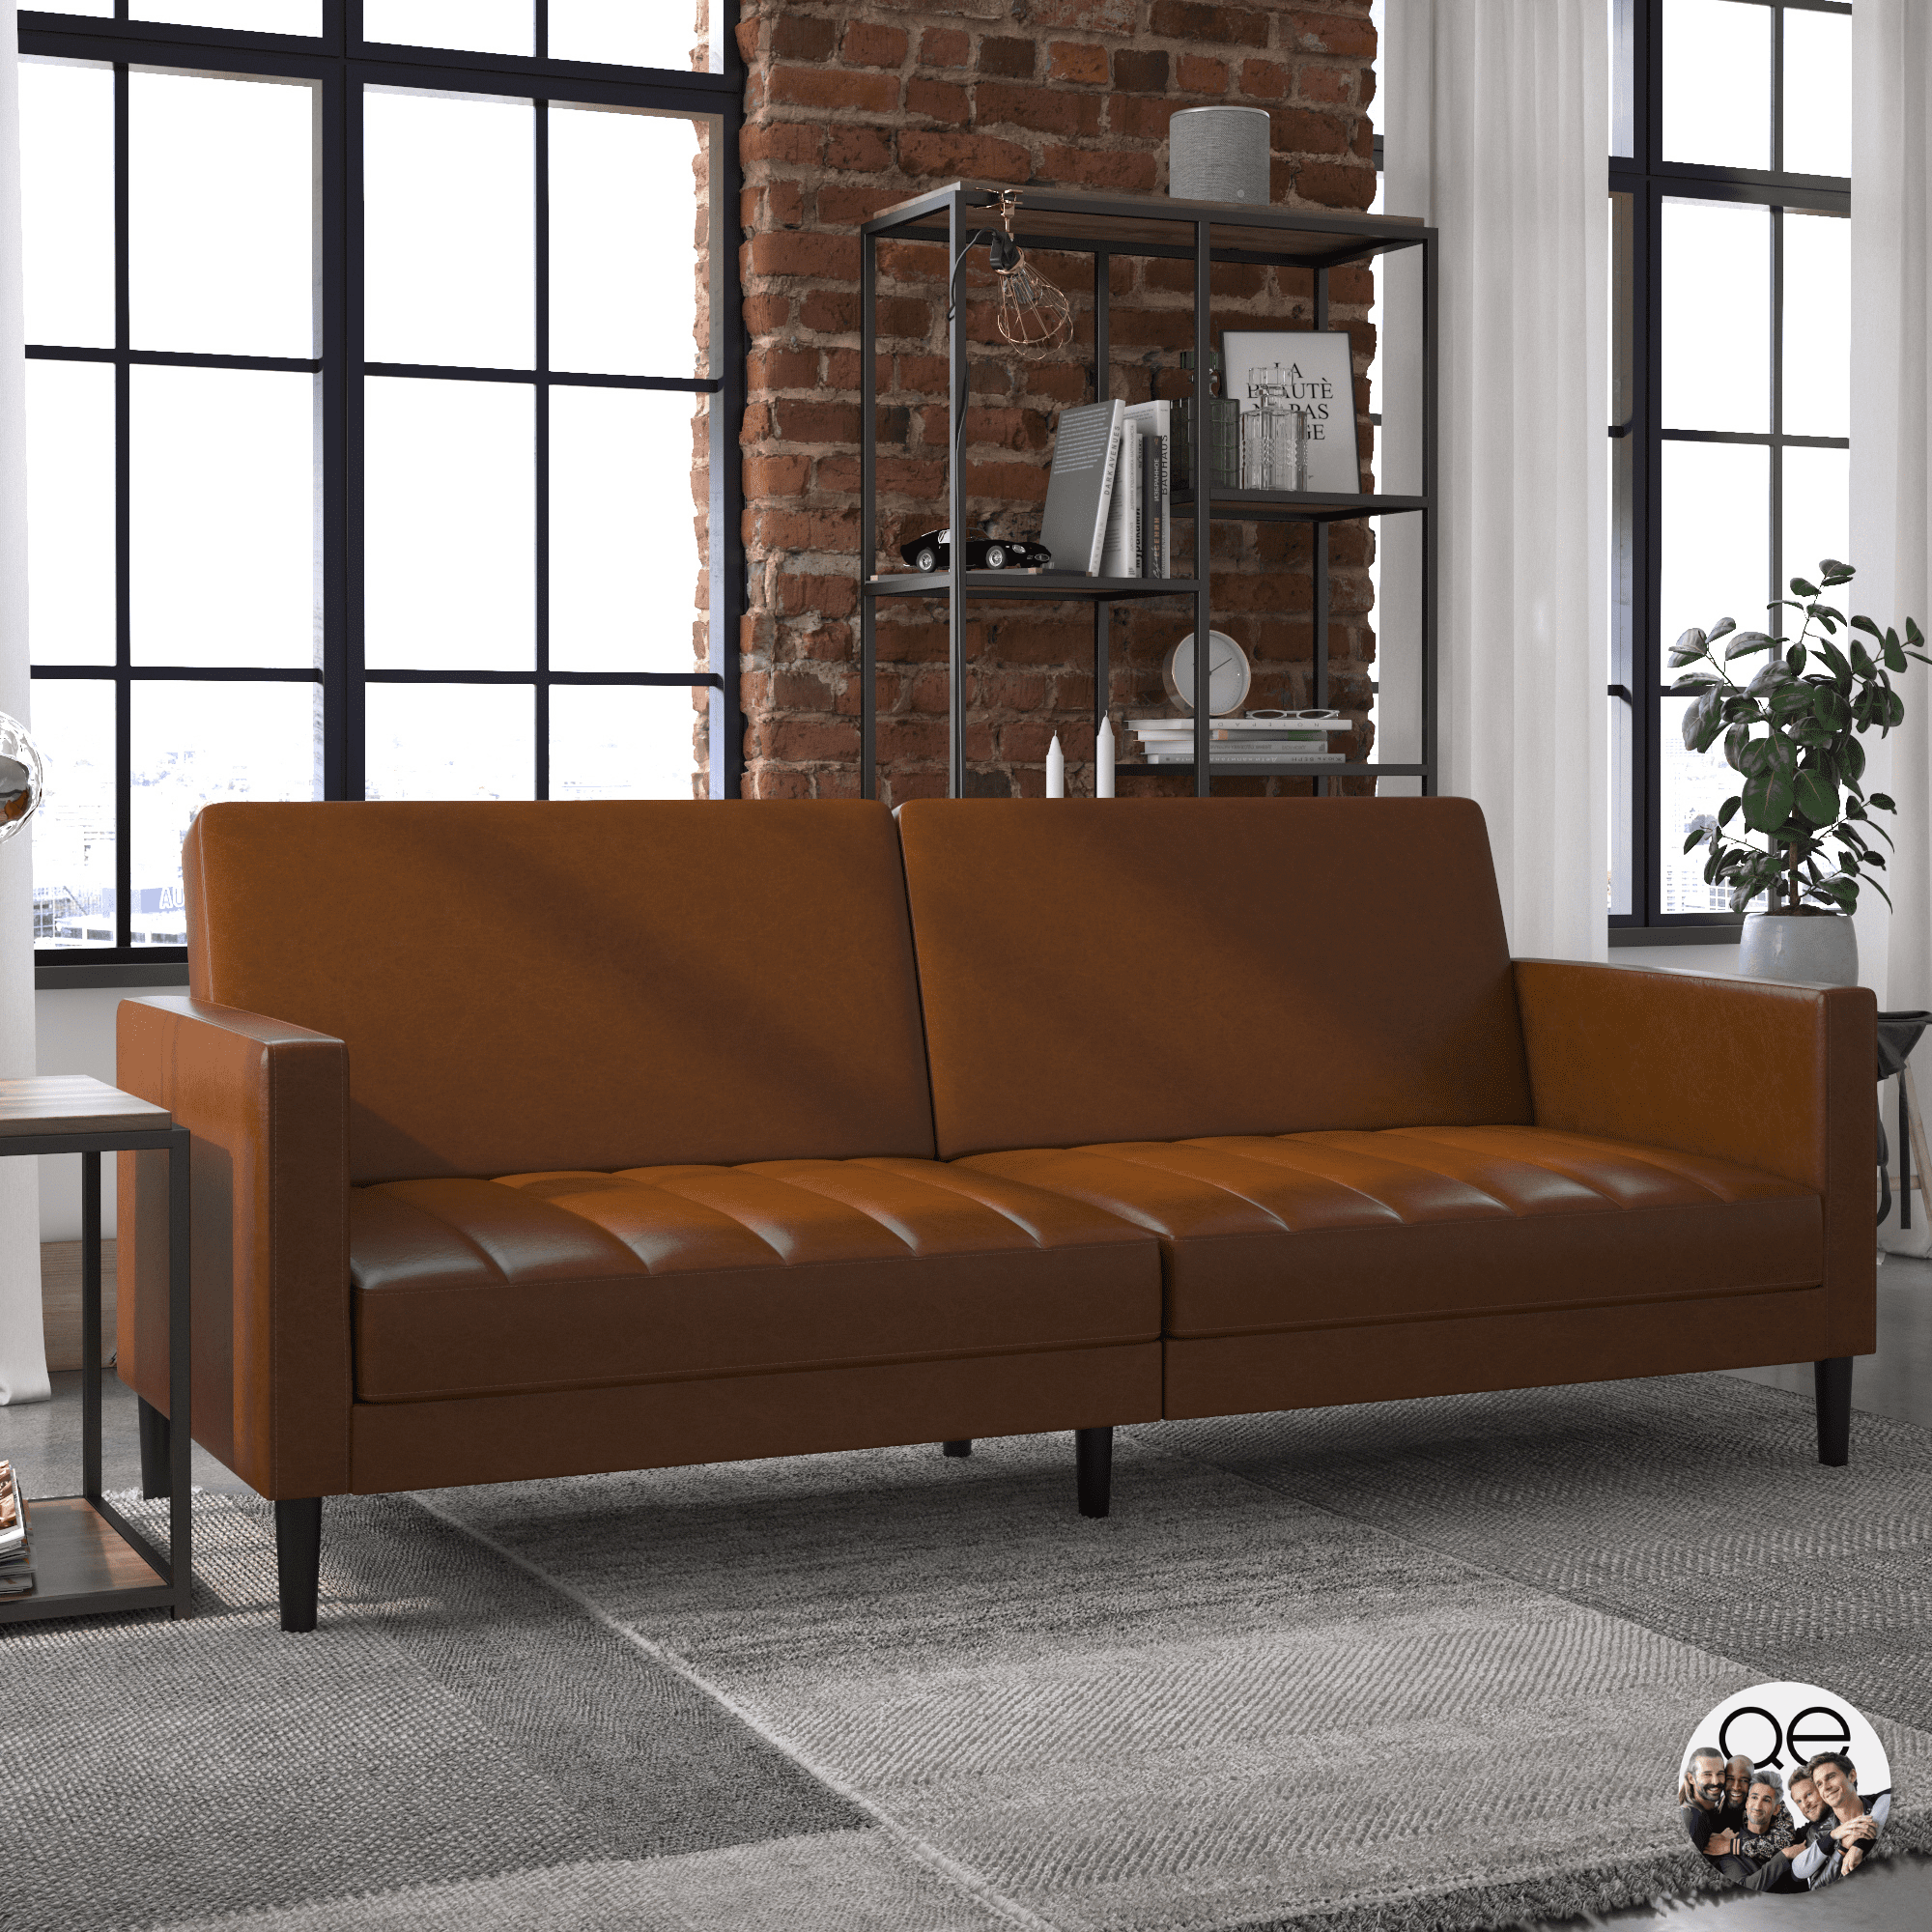 Eye Liam Futon Camel Faux, Camel Leather Couch